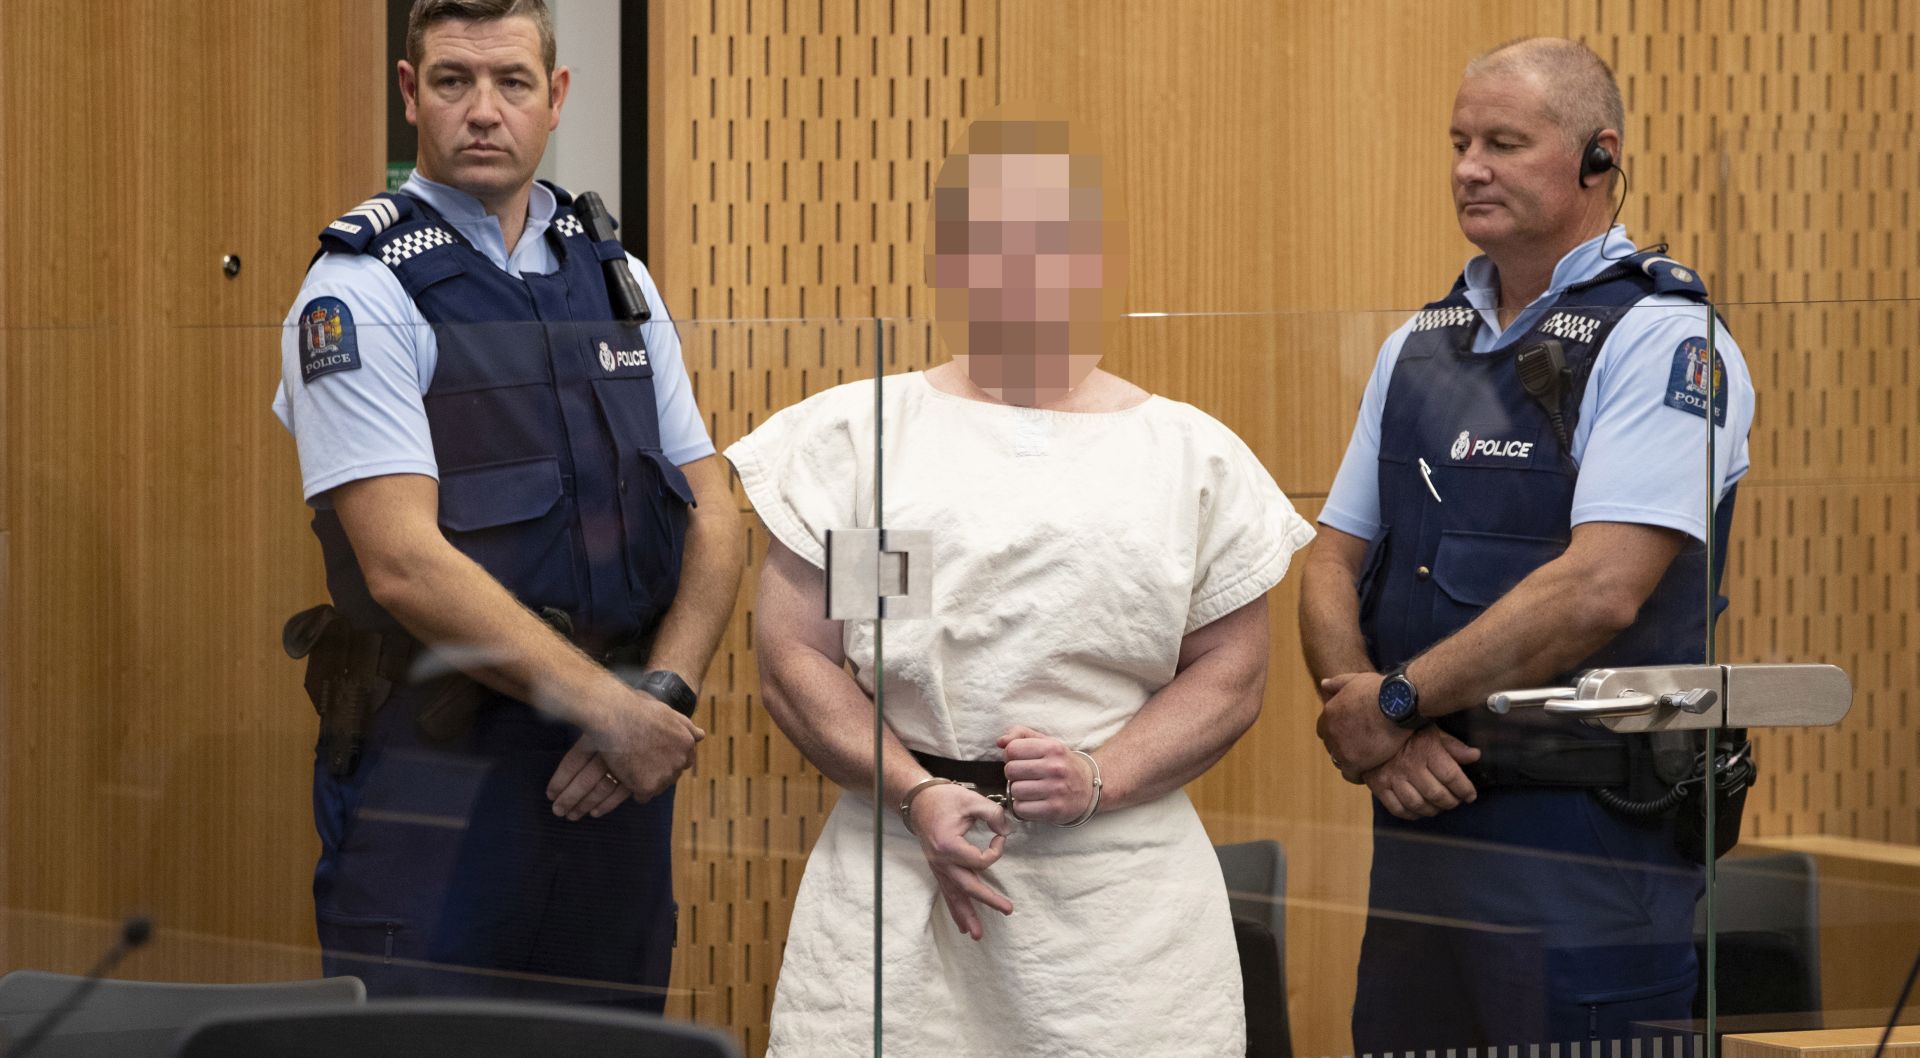 epa07441050 Brenton Tarrant (Pixelated) makes a sign to the camera during his appearance, on a charge of murder for Christchurch mosque massacre in the District Court, Christchurch, New Zealand, 16 March 2019. At least 49 people were killed by a gunman, believed to be Brenton Harrison Tarrant, and 20 more injured and in critical condition during the terrorist attacks against two mosques in New Zealand during Friday prayers on 15 March.  EPA/Martin Hunter / POOL NEW ZEALAND OUT